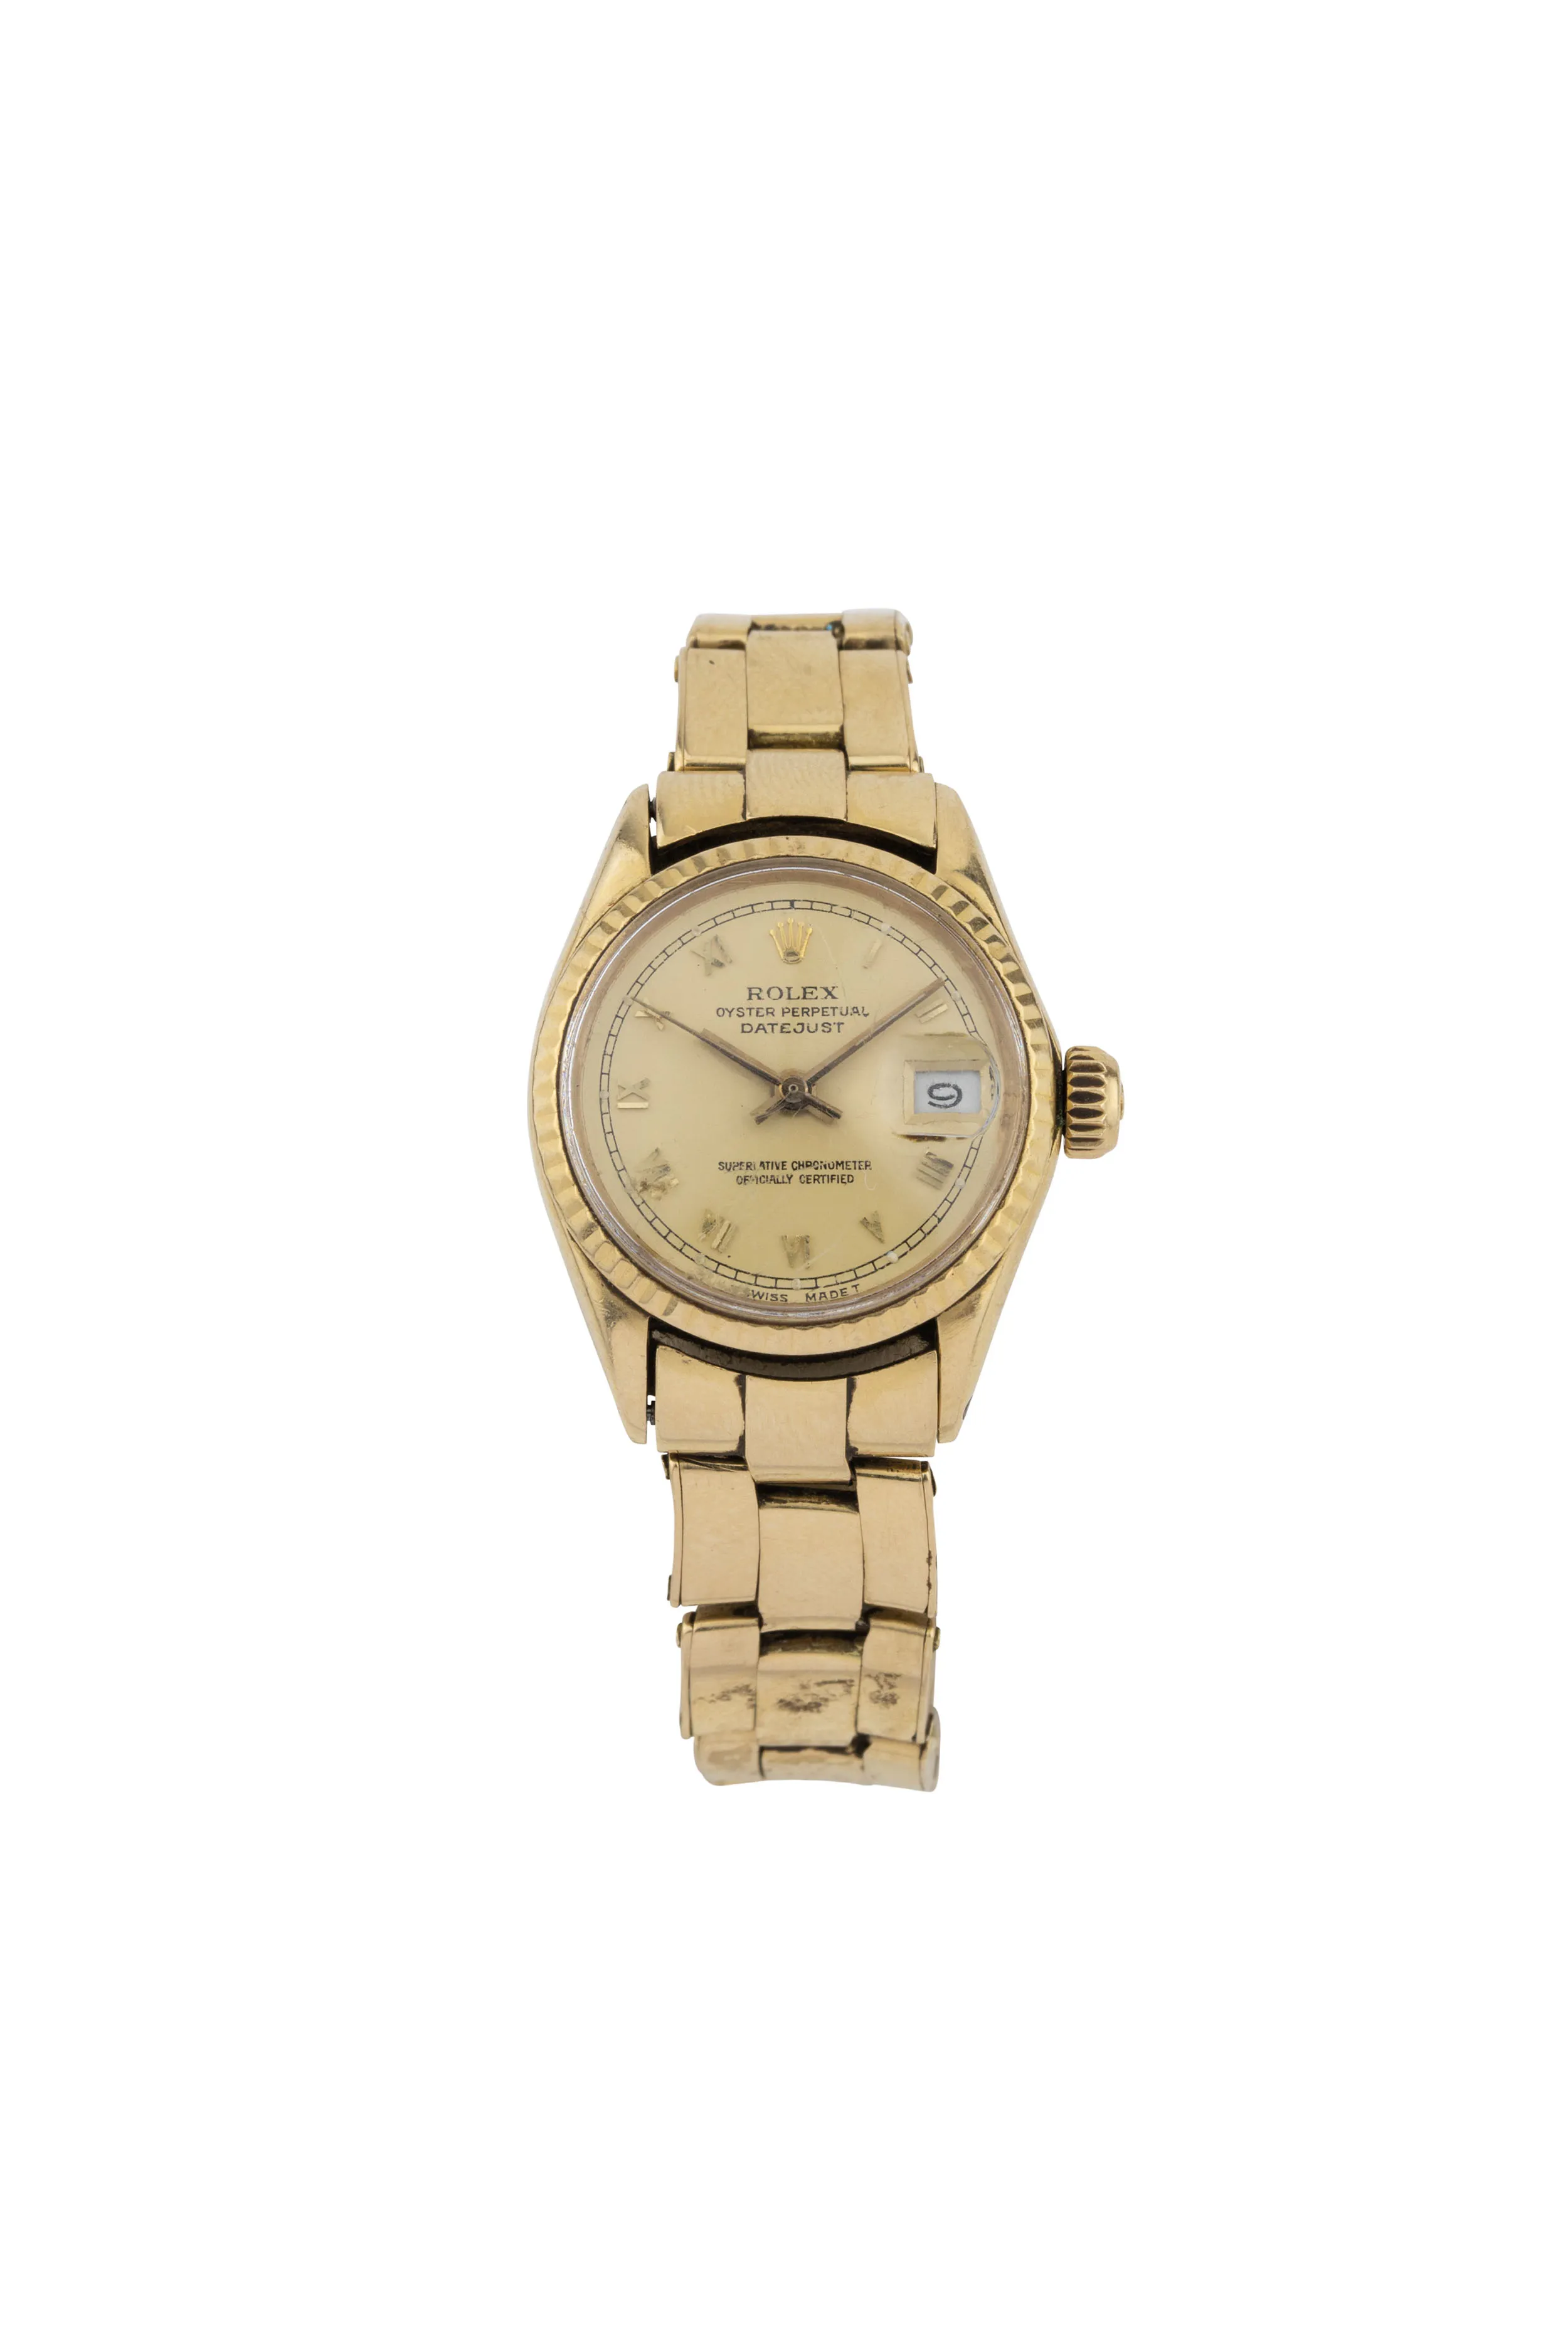 Rolex Oyster Perpetual Date 6517 24mm Yellow gold